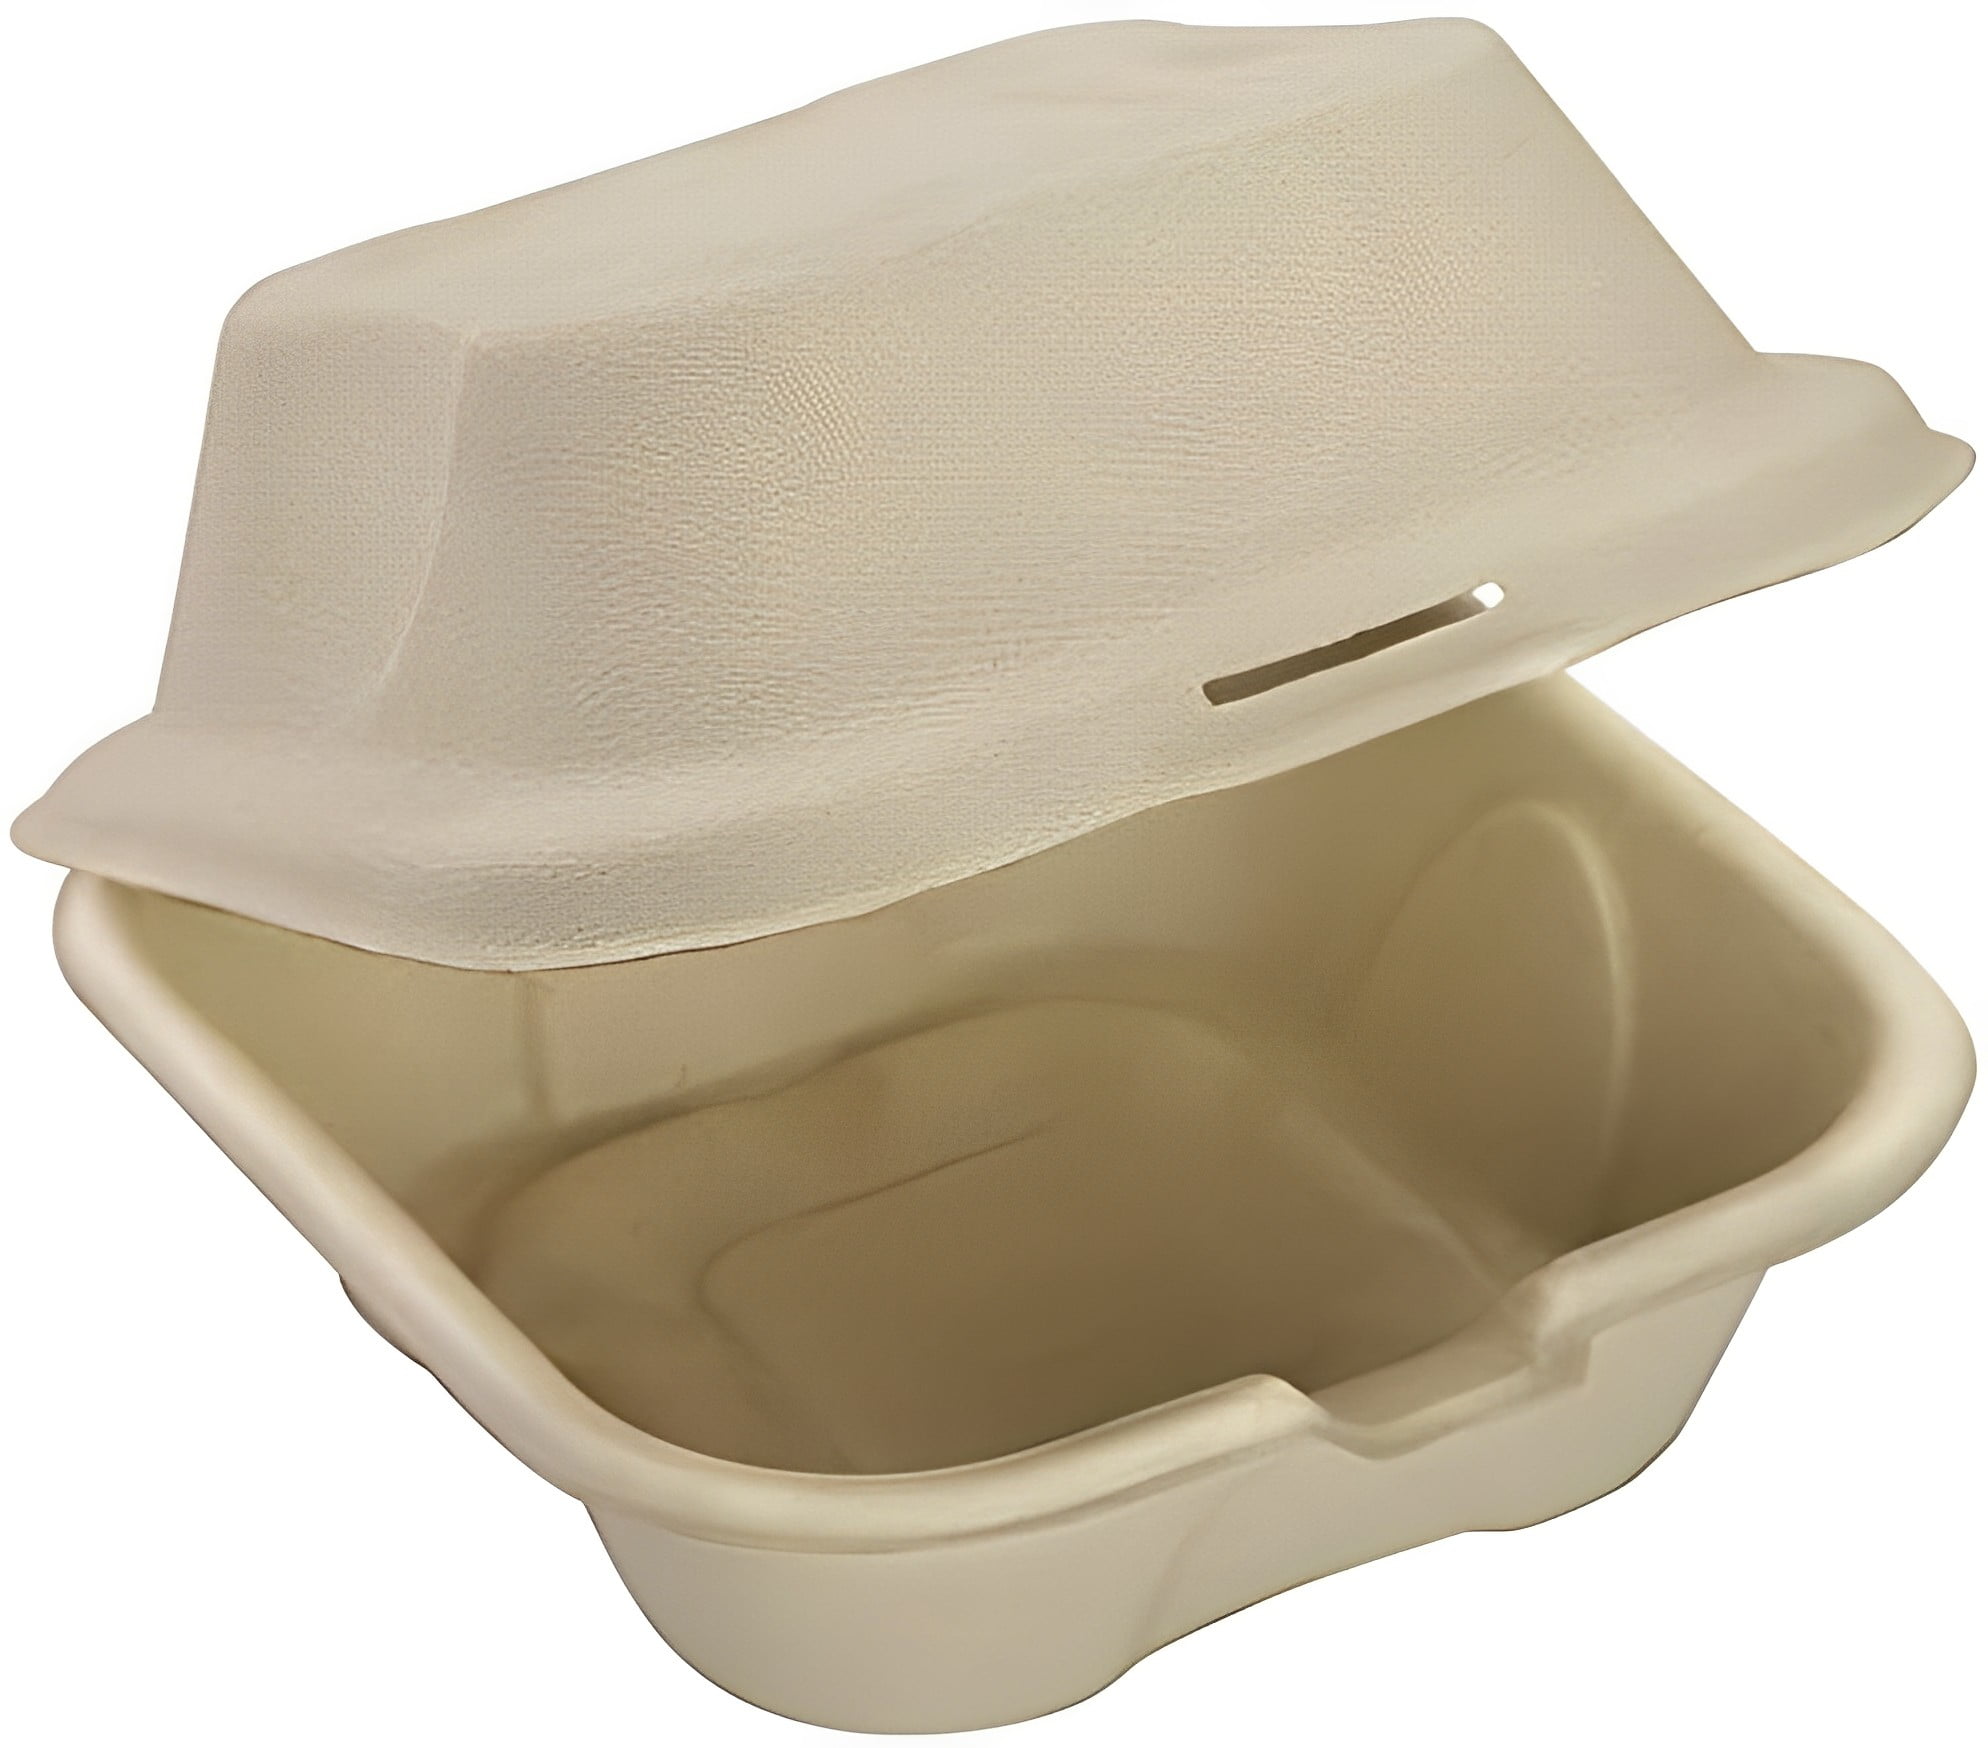 Avant Grub Biodegradable 6x6 Take Out Food Containers with Clamshell Hinged Lid 100 Pack. Microwaveable, Disposable Takeout Box to Carry M